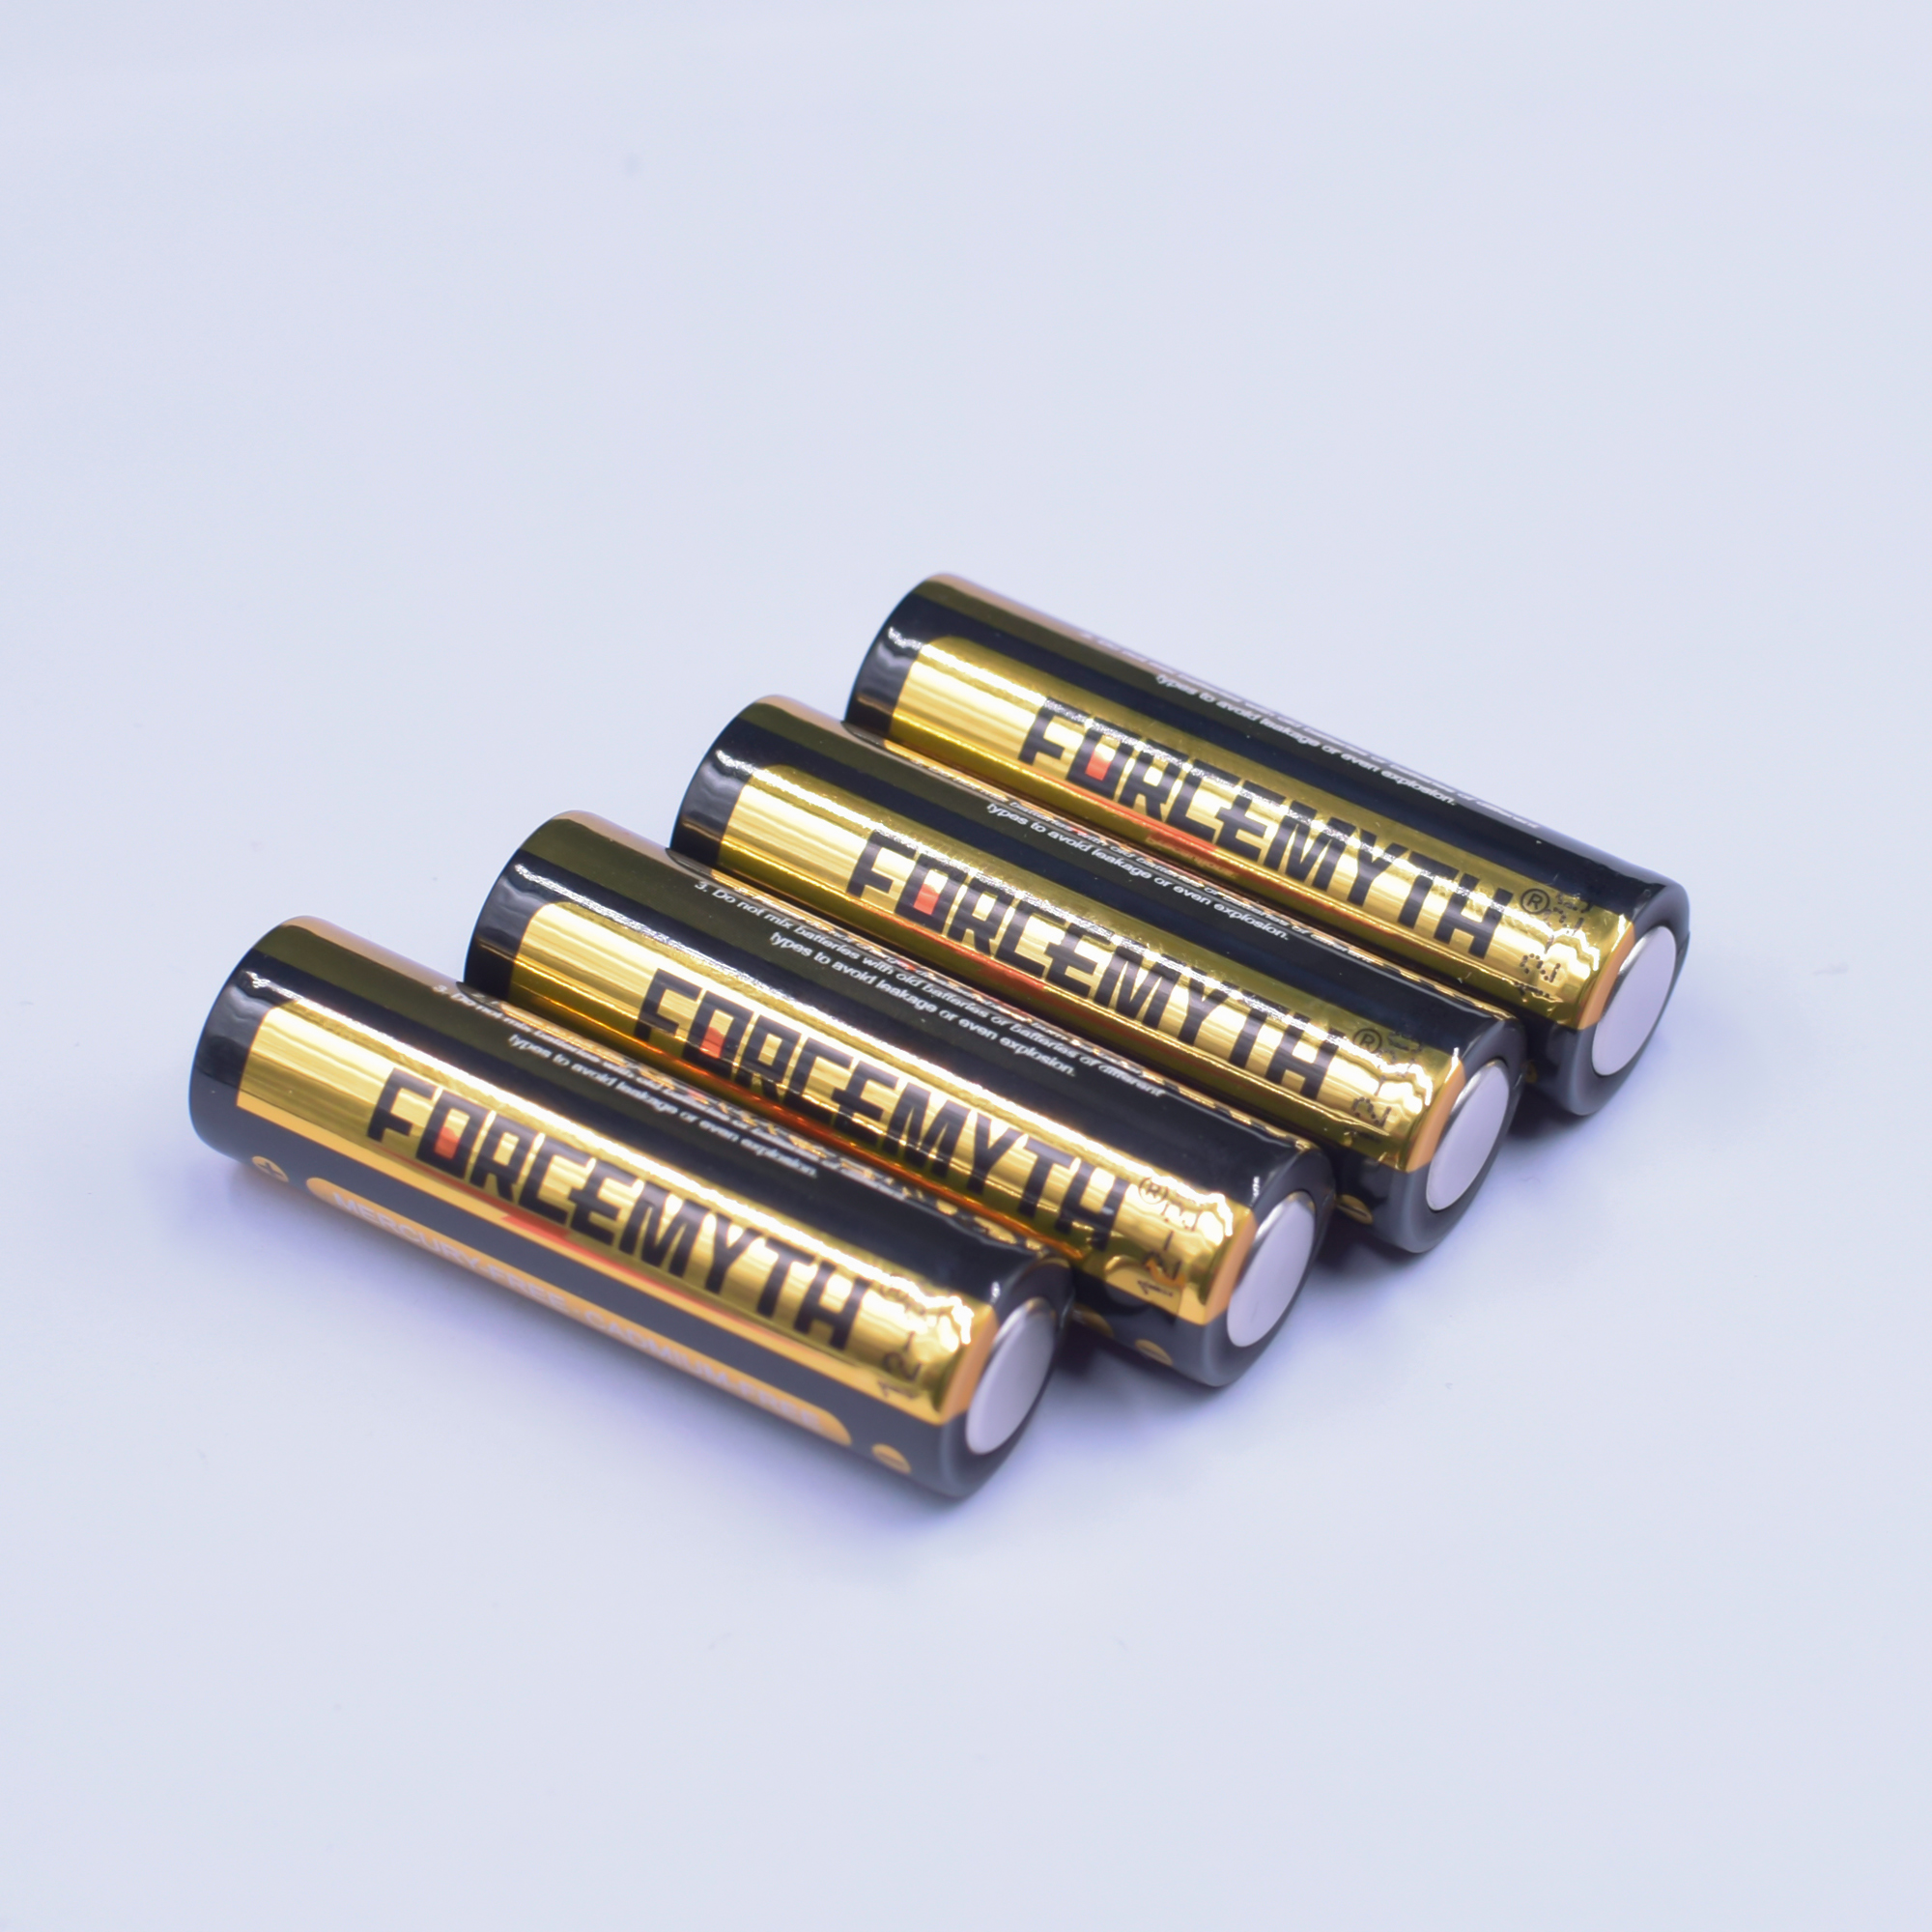 High Quality 1.5V AAA LR03 Alkaline Battery For Toys